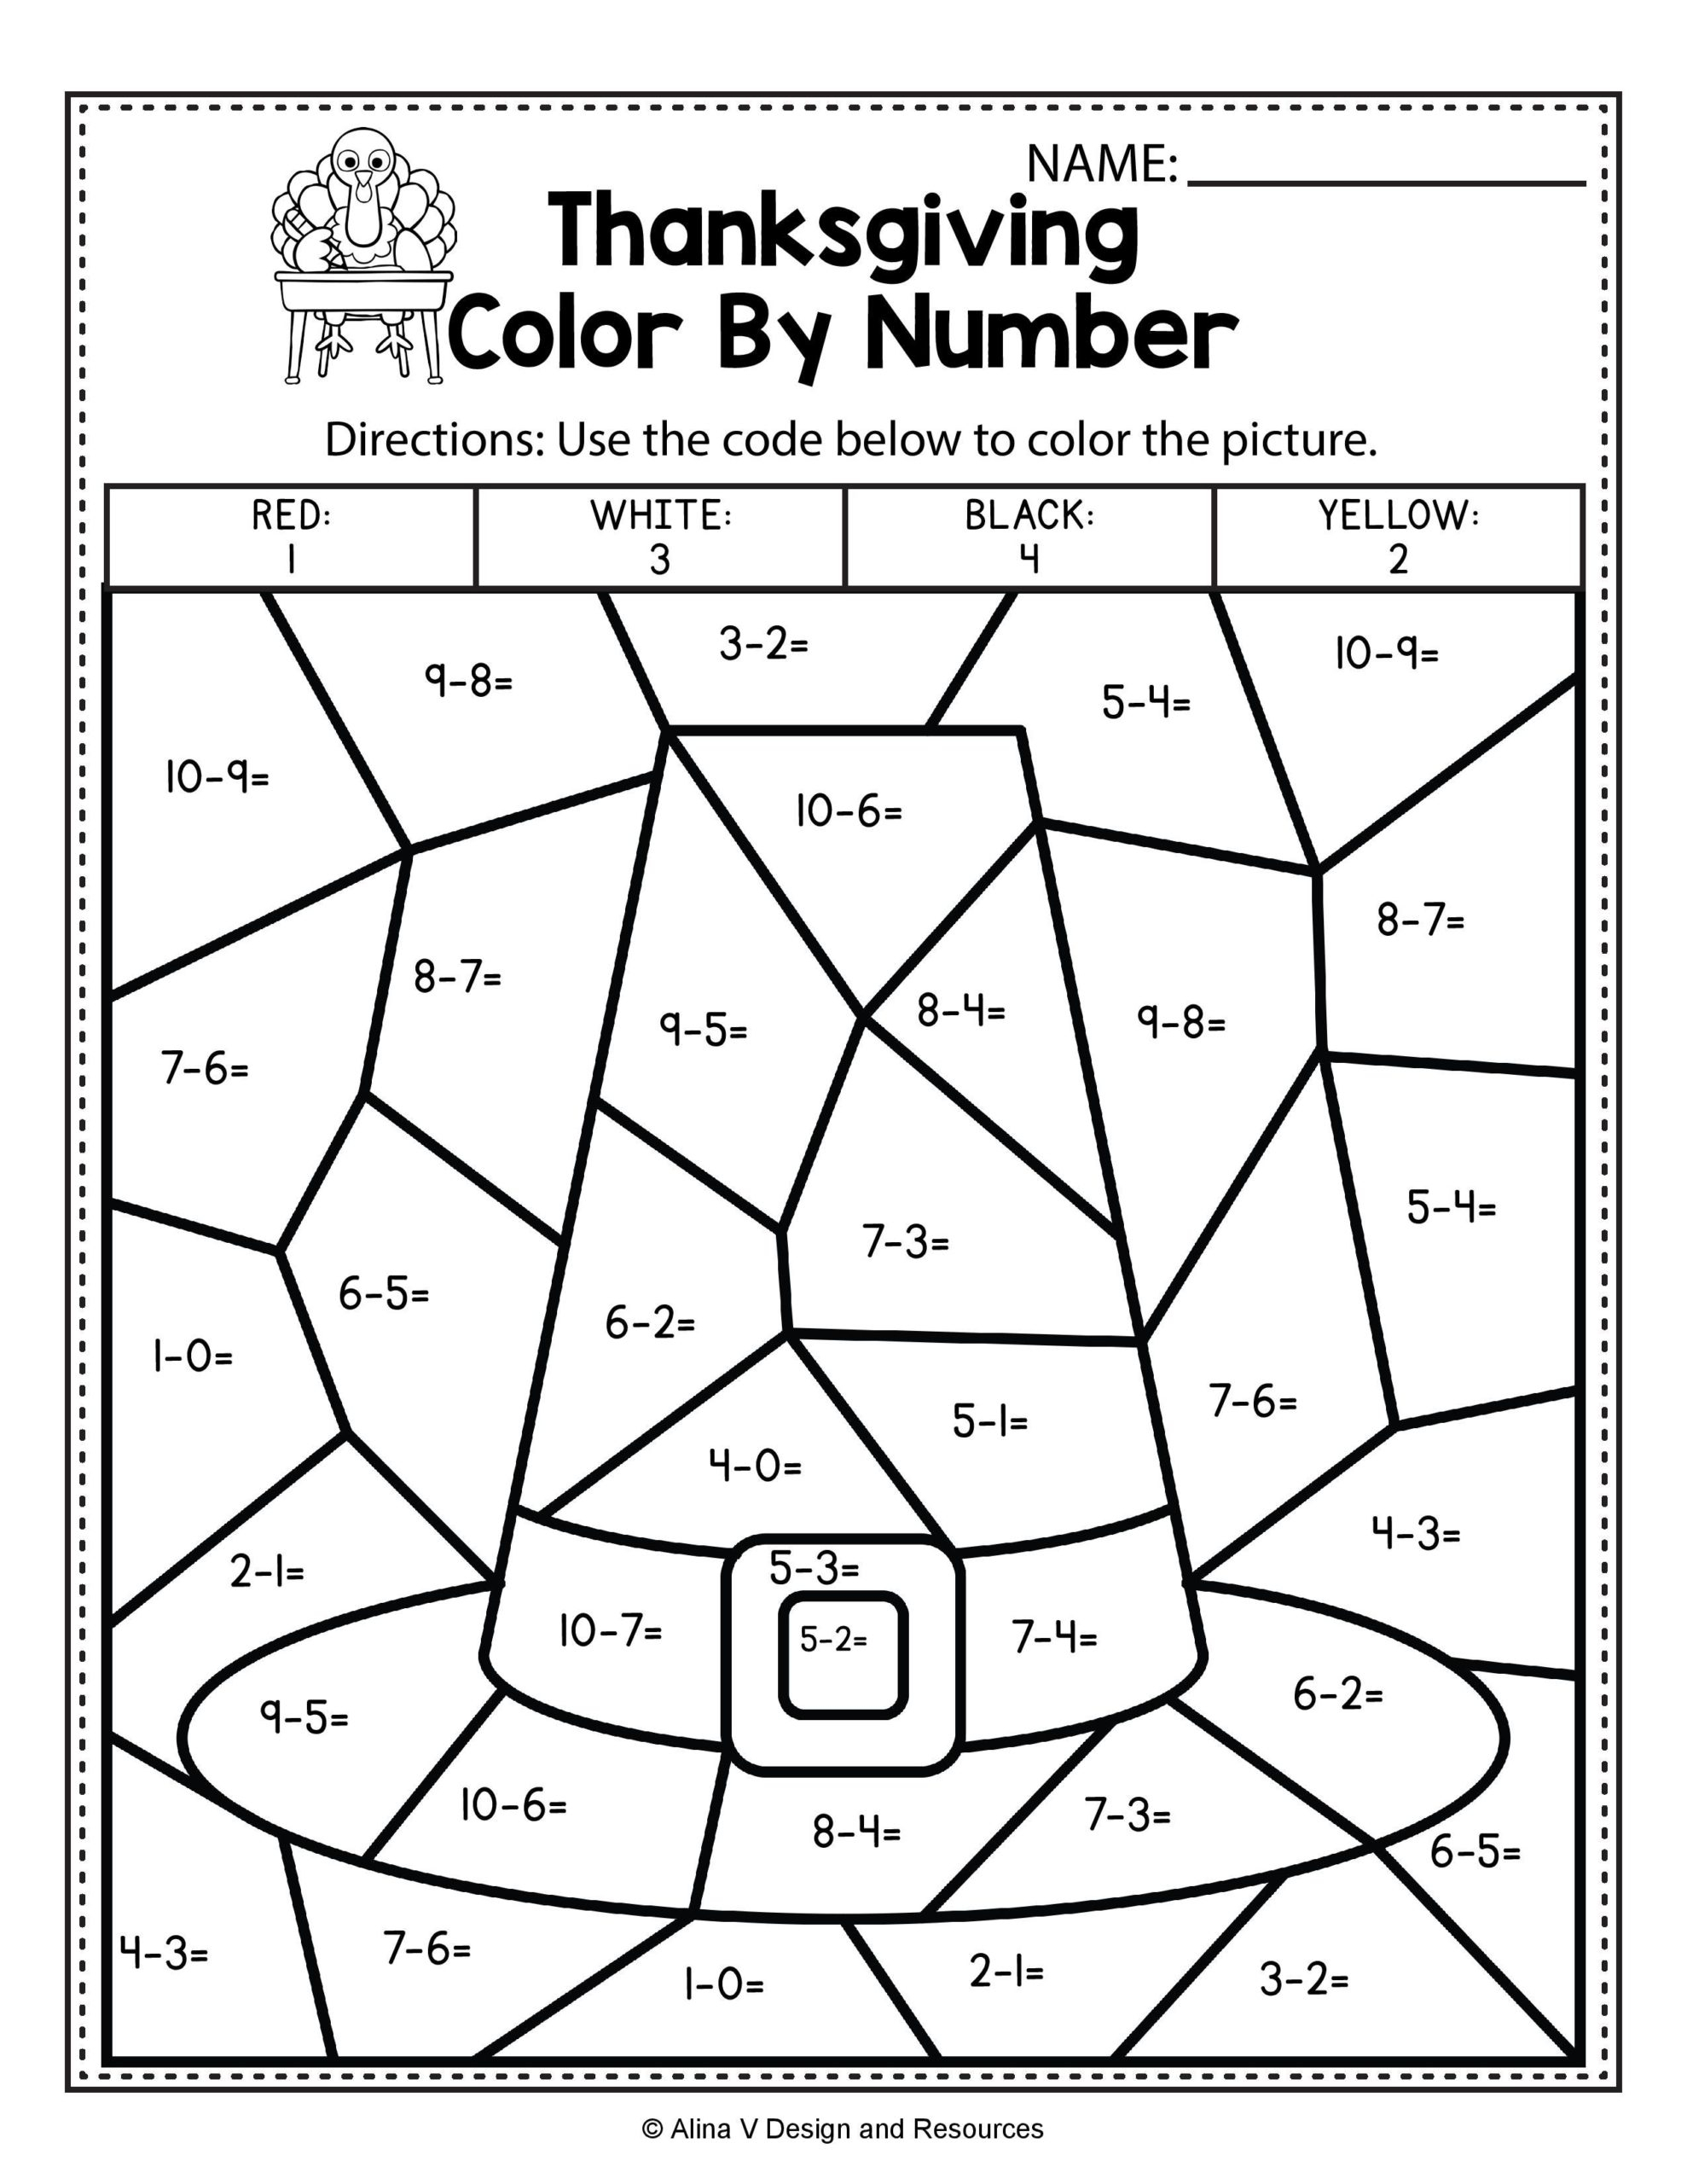 Coloring Pages : Thanksgiving Colornumber Subtraction inside Multiplication Worksheets Elementary